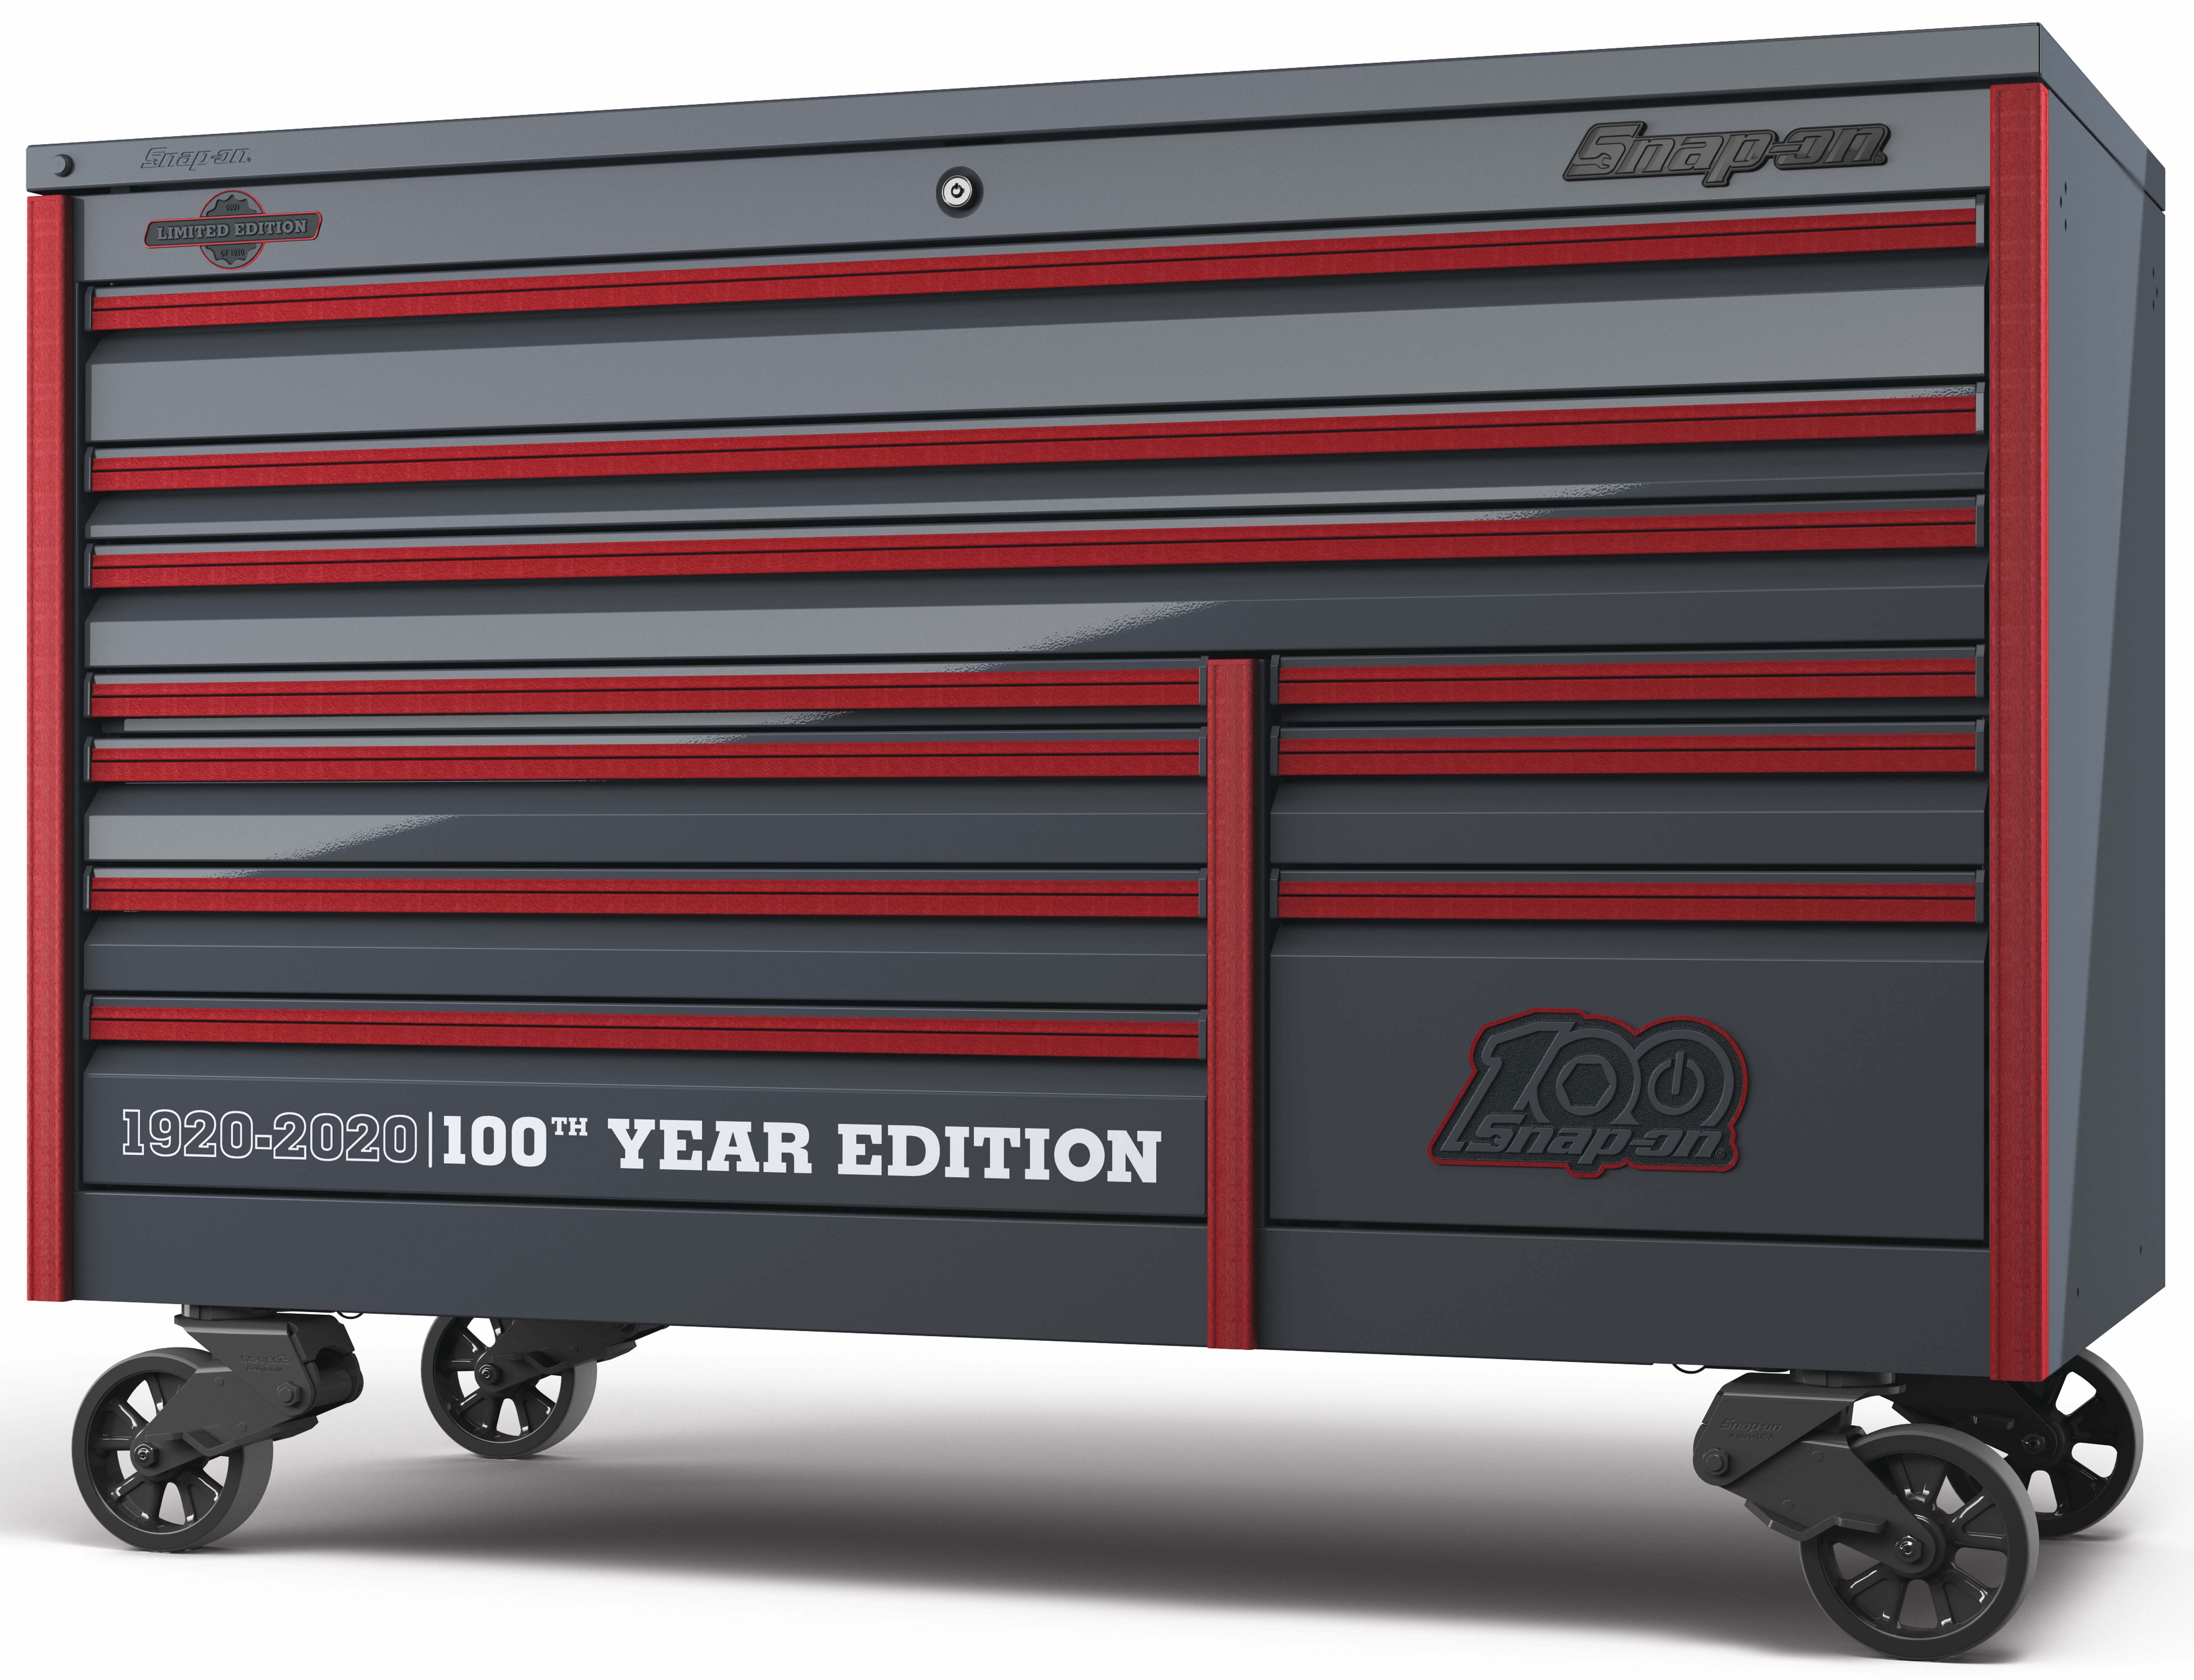 Snap-on releases special-edition toolbox | Trucks, Parts, Service